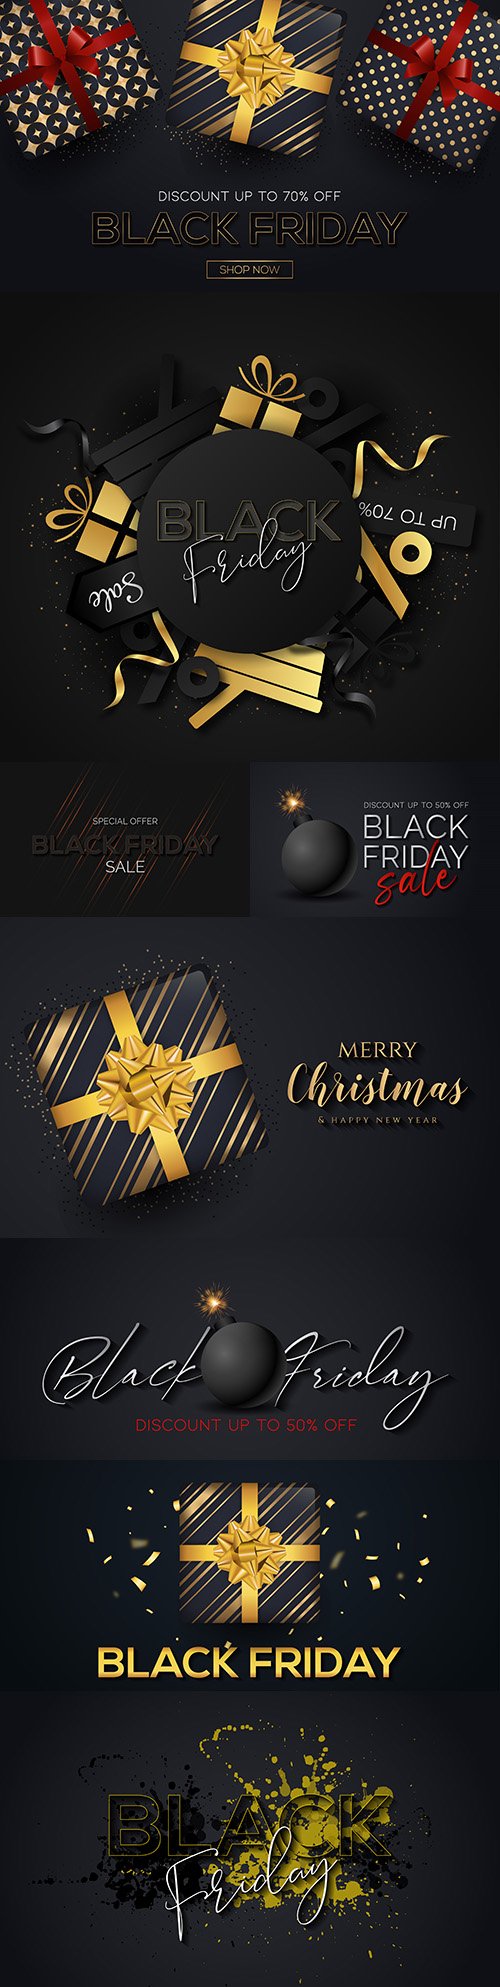 Merry Christmas Black Friday promotion sale special banner